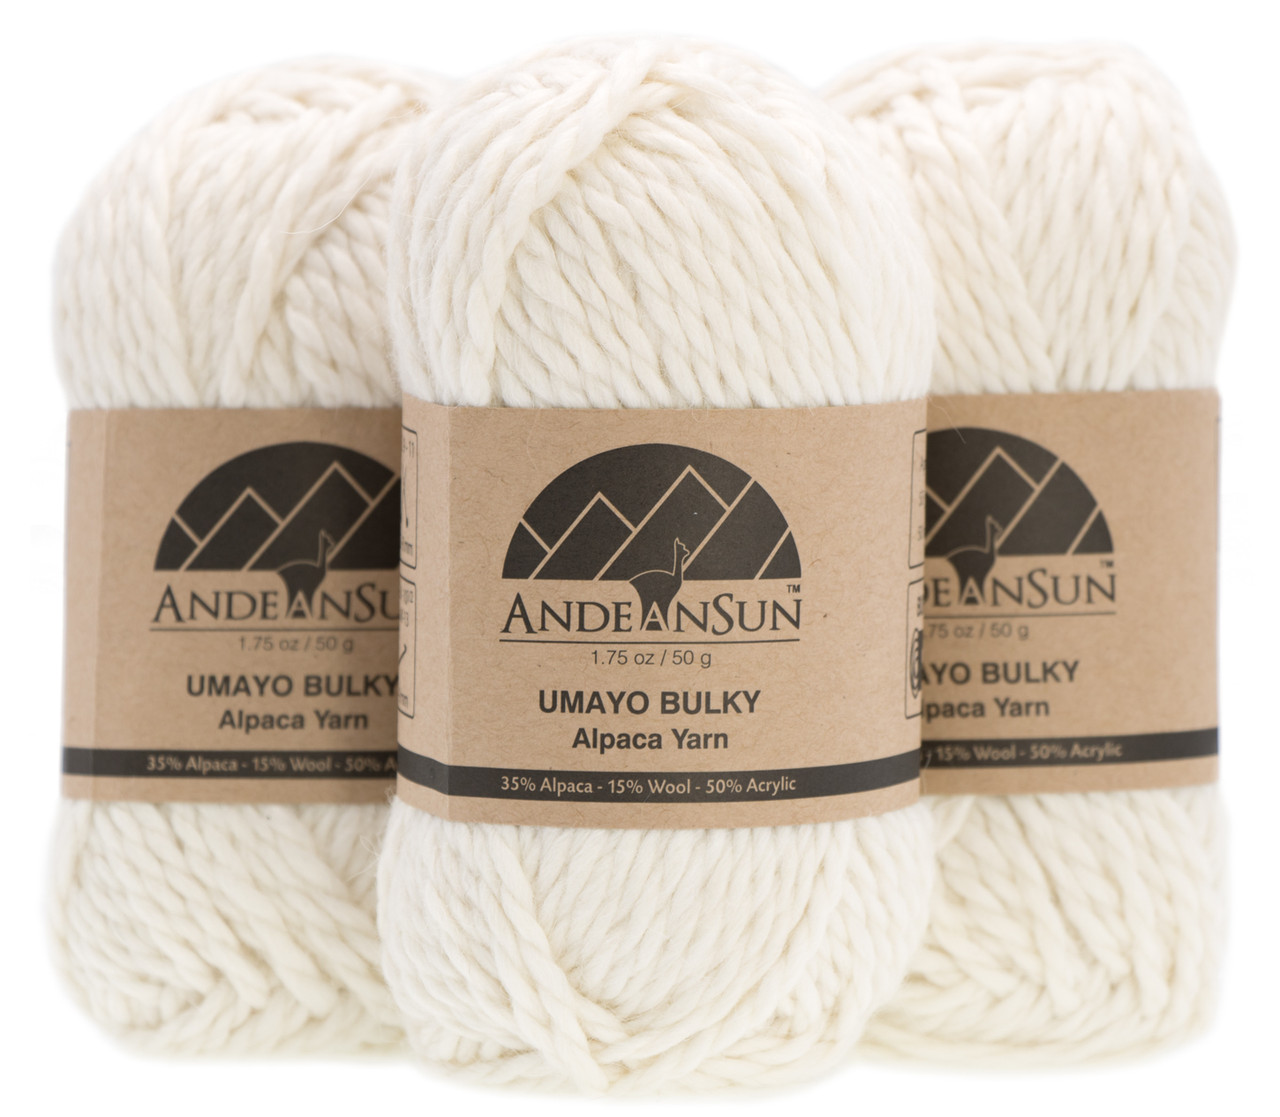 Buy Alpaca Merino Cotton: 5 Bulky Weight Yarn for All Seasons. Soft and  Chunky Yarn Without the Bulk, Fluffy but Not Itchy. XOXO Oatmeal Online in  India 